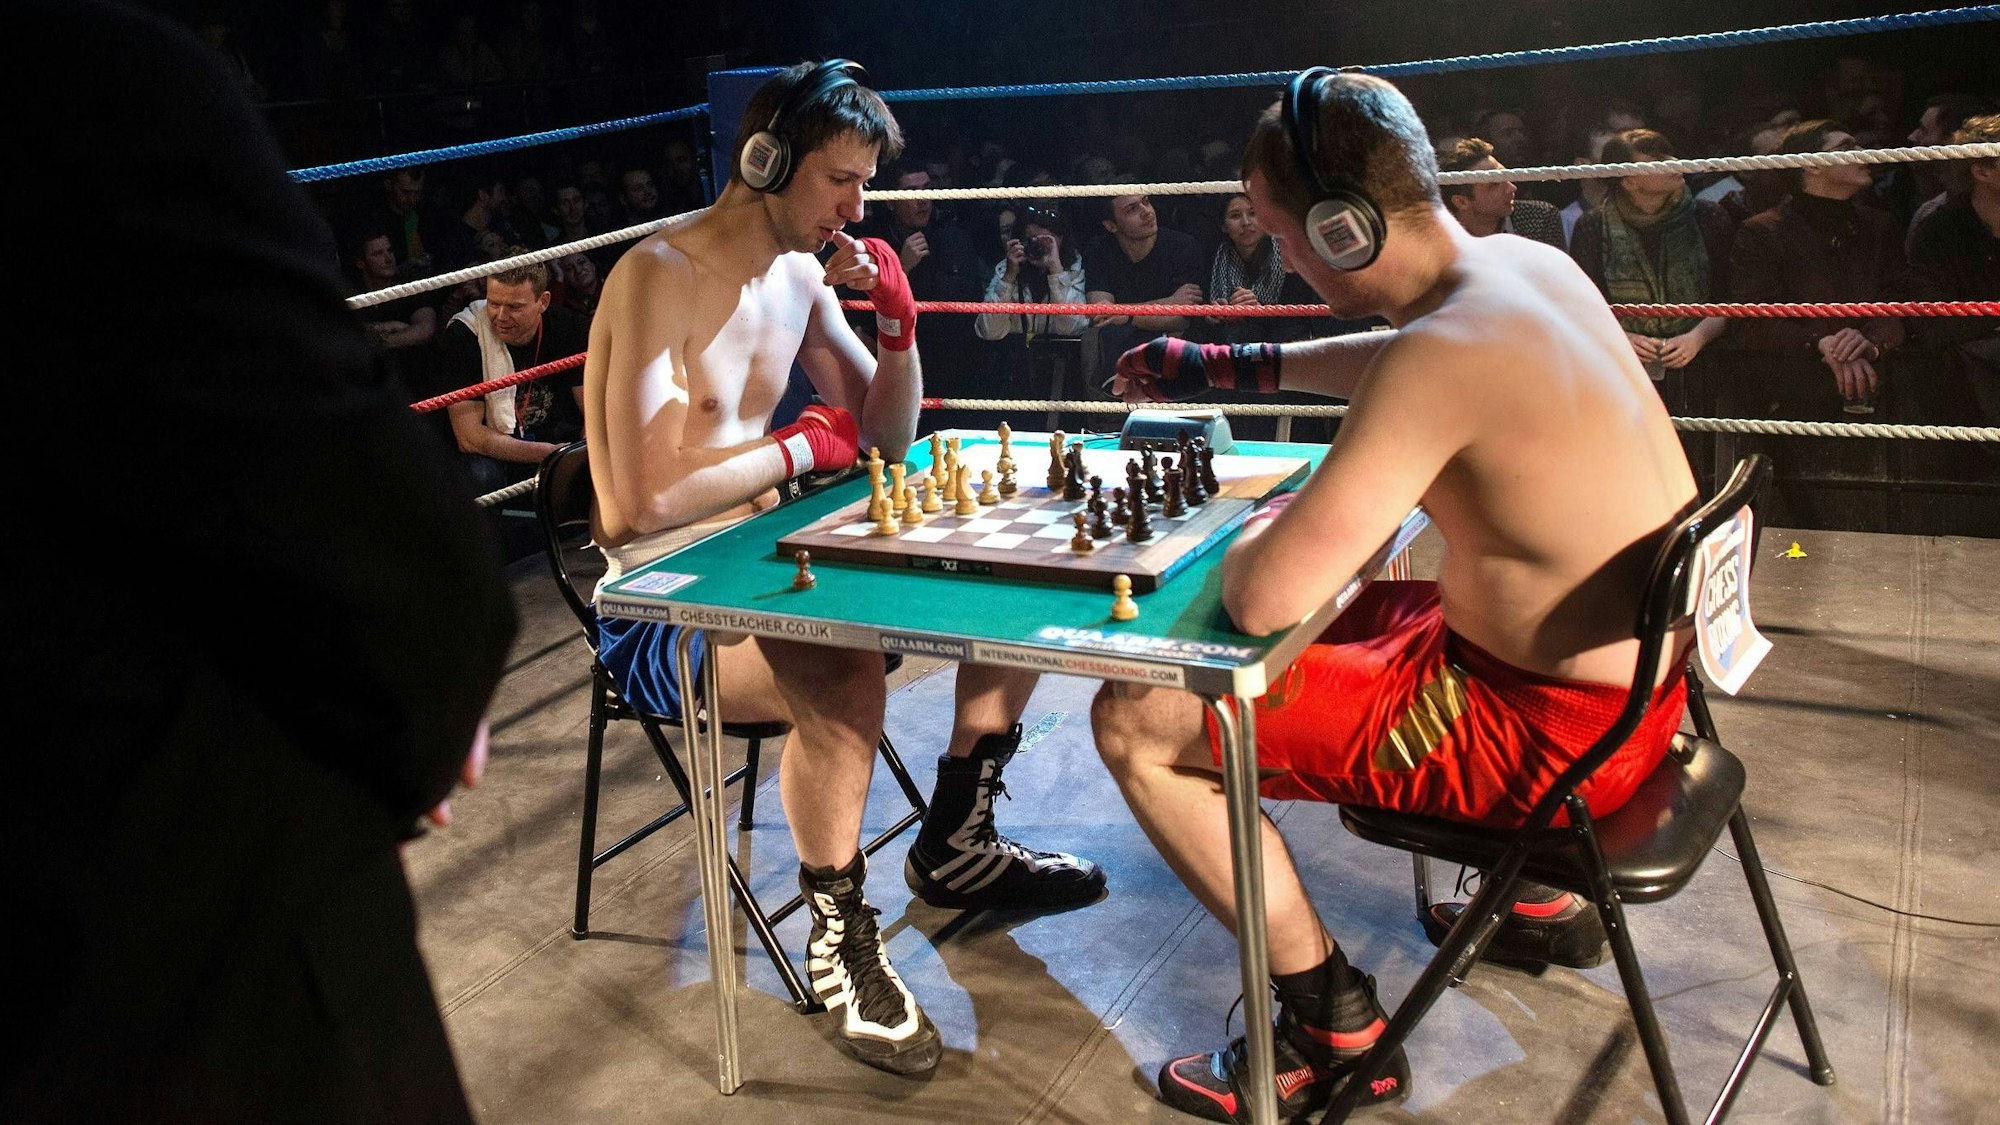 Bildnummer: 13128766  Datum: 23.03.2013  Copyright: imago/ZUMA Press
March 23, 2013 - London, England, United Kingdom - CHRIS LEVY (R) and MATT READ compete in a bout at the Chessboxing Grand Prix in Scala on Saturday night. The hybrid combines chess with boxing in alternating rounds. The winner is decided by a knockout or checkmate, whichever comes first. A full match consists of eleven rounds: six rounds of chess and five of boxing. Chessboxing Grand Prix 2013 PUBLICATIONxINxGERxSUIxAUTxONLY - ZUMA; Schachboxen xsp x0x 2013 quer Highlight premiumd Symbolfoto

Image number 13128766 date 23 03 2013 Copyright imago Zuma Press March 23 2013 London England United Kingdom Chris Levy r and Matt Read compete in A Bout AT The  Grand Prix in Scala ON Saturday Night The Hybrid  Chess with Boxing in  Rounds The WINNER is decided by A Knockout Or Checkmate  comes First A Full Match  of Eleven Rounds Six Rounds of Chess and Five of Boxing  Grand Prix 2013 PUBLICATIONxINxGERxSUIxAUTxONLY Zuma Chess boxing  x0x 2013 horizontal Highlight premiumd Symbolic image 